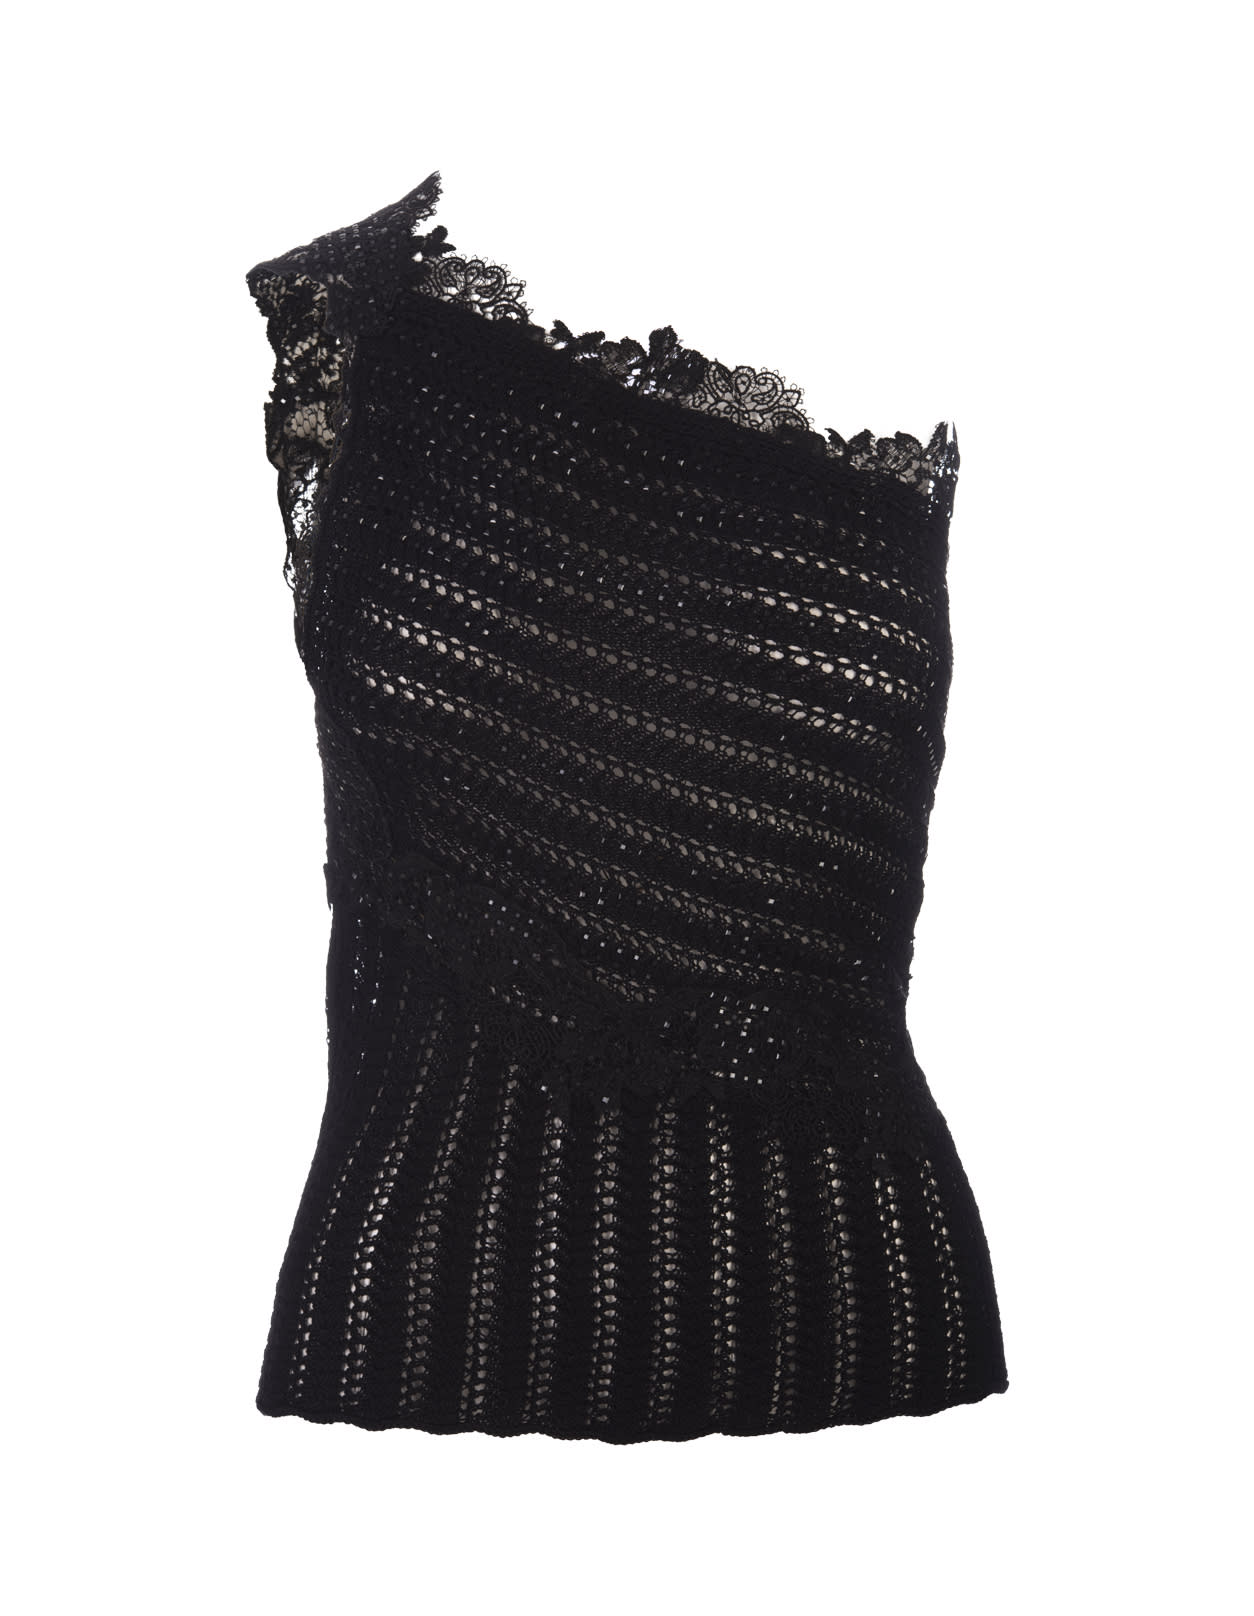 Black Cotton Top With Lace And Crystals